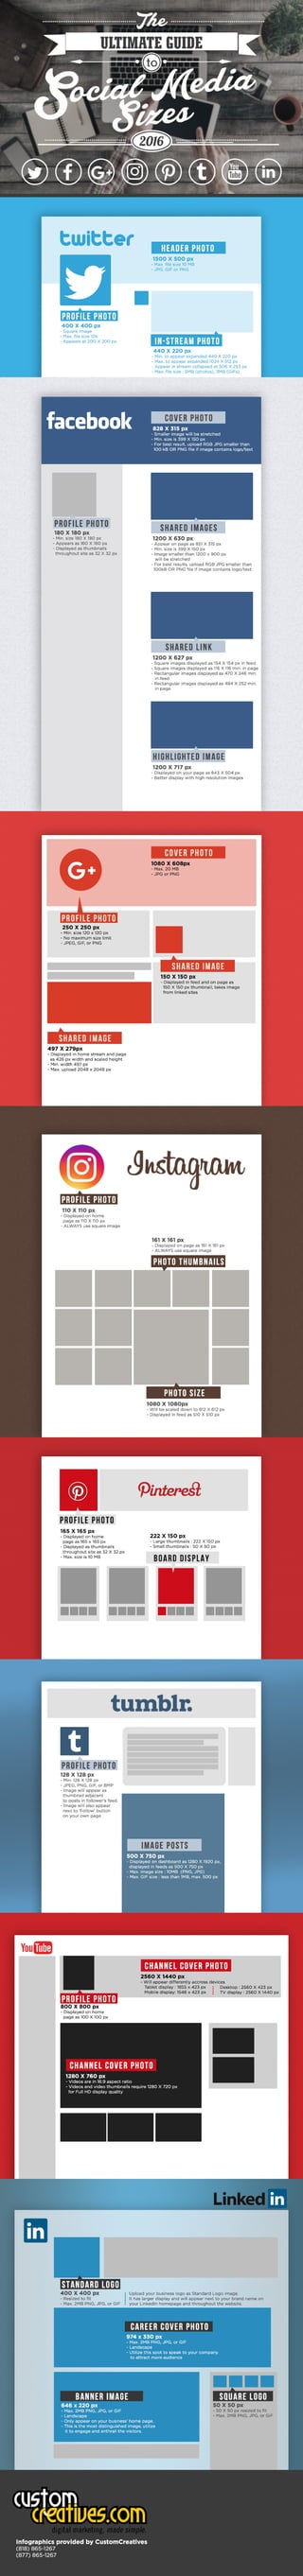 The Ultimate Guide to Social Media Image Sizes